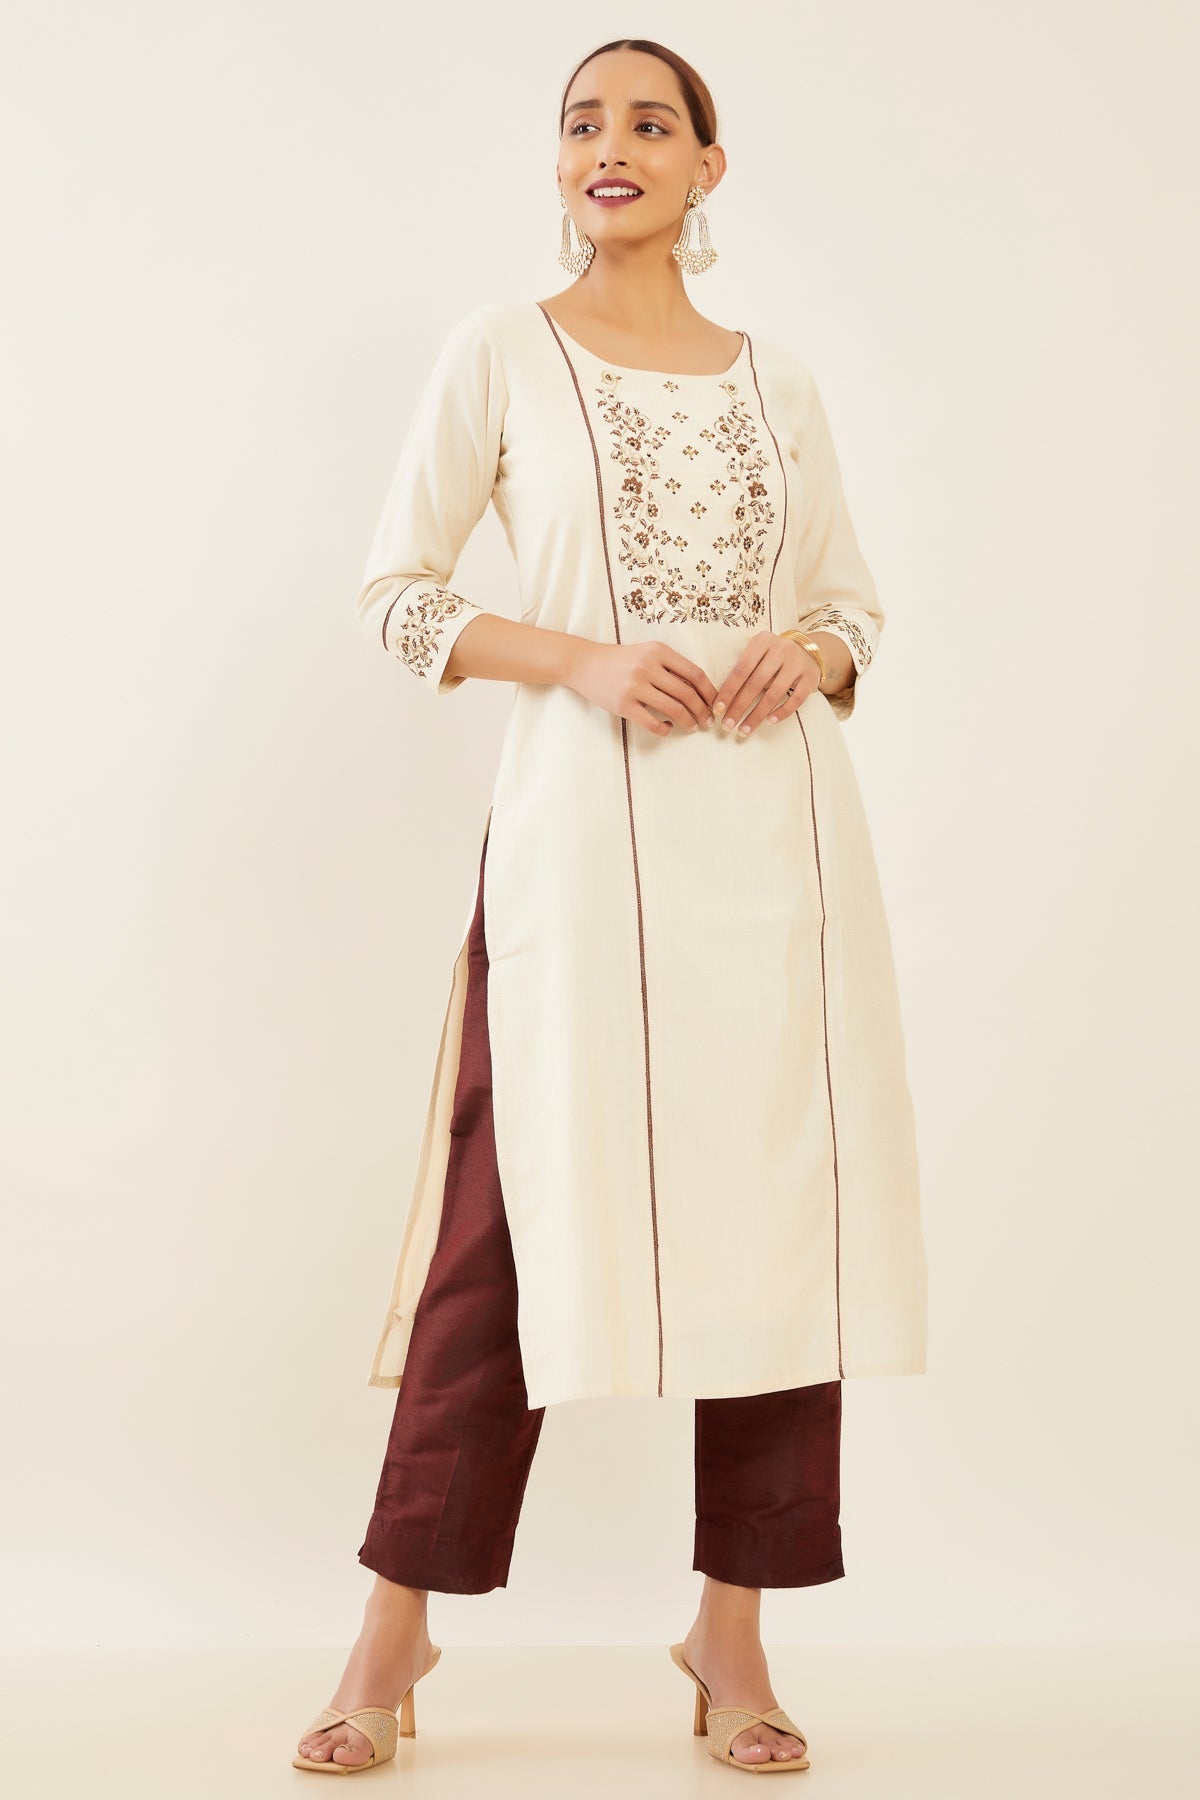 Floral Scroll Motif Embroidered Kurta - Off-White